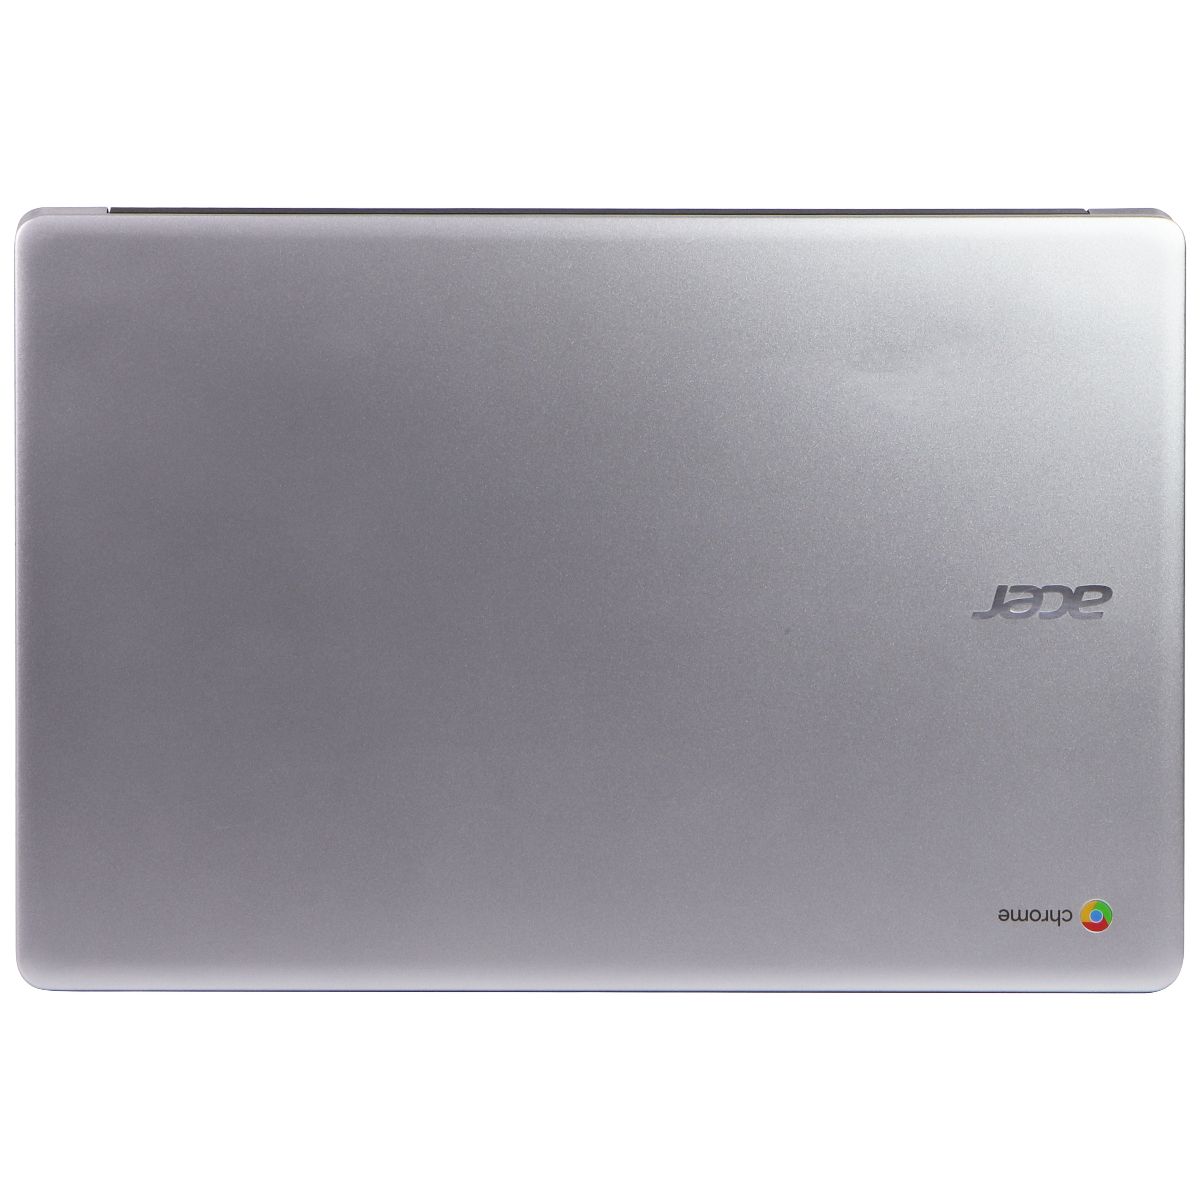 Acer Chromebook (15.6-in) Laptop (N17Q5) Pentium N4200/64GB SSD/8GB/Chrome OS Laptops - PC Laptops & Netbooks Acer    - Simple Cell Bulk Wholesale Pricing - USA Seller